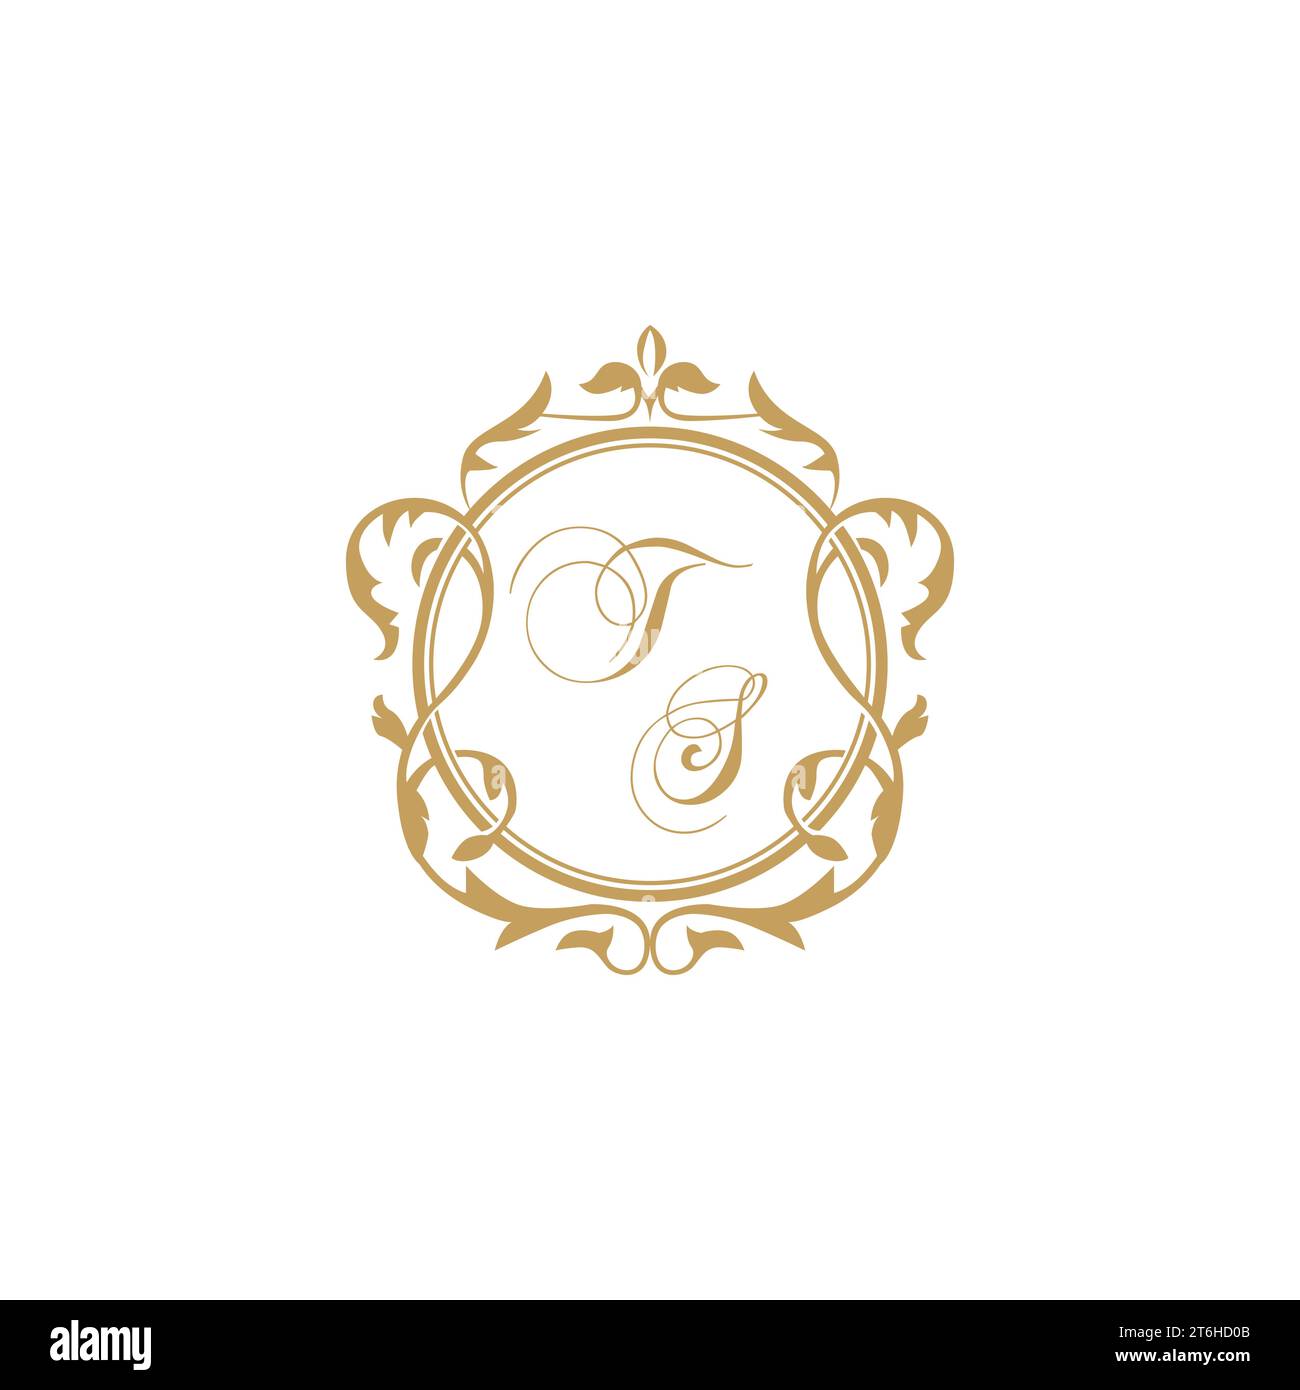 TS Wedding initial invitation with elegant ornament circle element vector graphic template Stock Vector